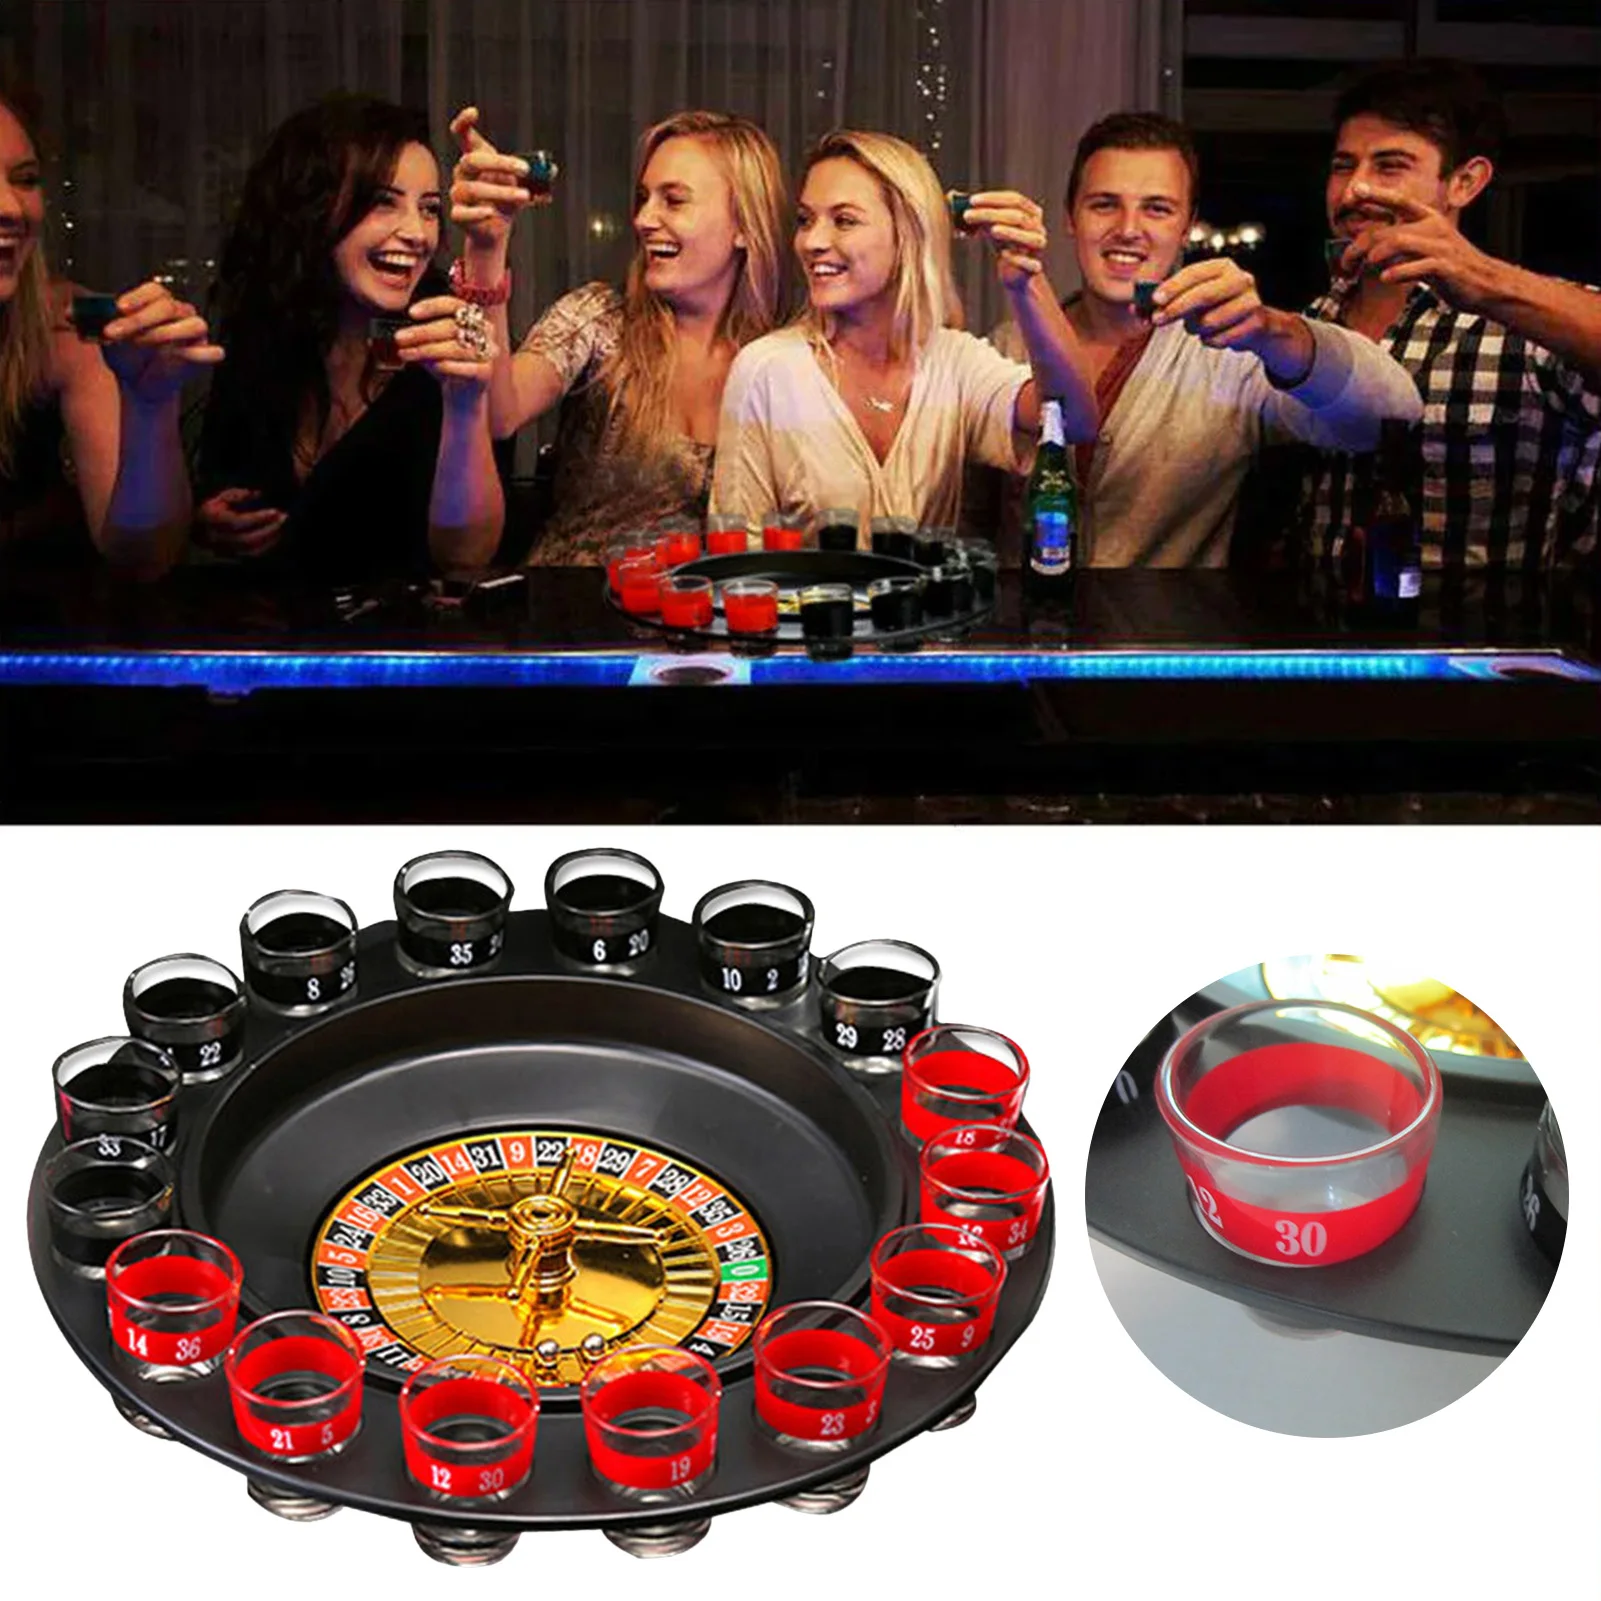 

16 Shot Glass Deluxe Russian Spinning Roulette Poker Chips Drinking Game Set Party Supplies Wine Games For Adult Drinken Game